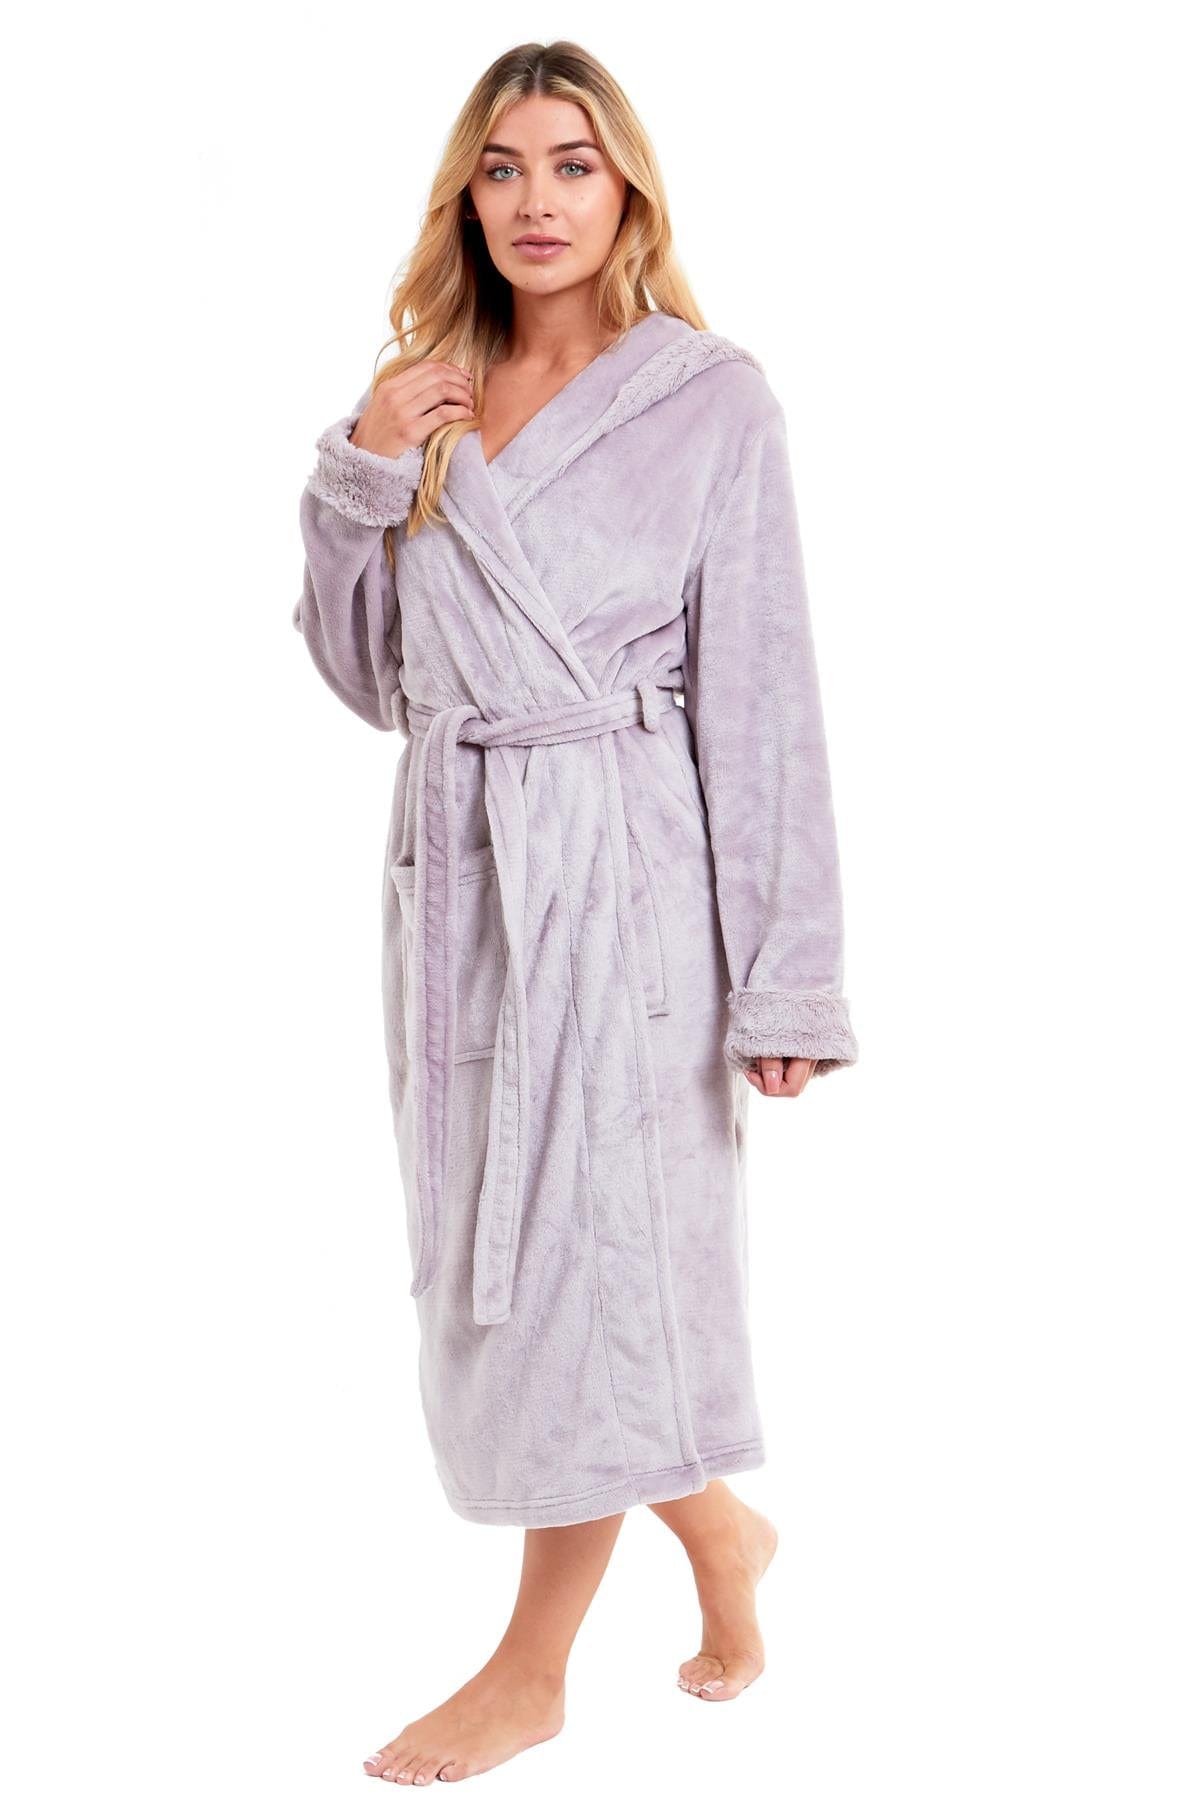 Women's Faux Fur Hooded Robe Dressing Gown Bath Robe Super Soft Luxury Gowns OLIVIA ROCCO Dressing Gown